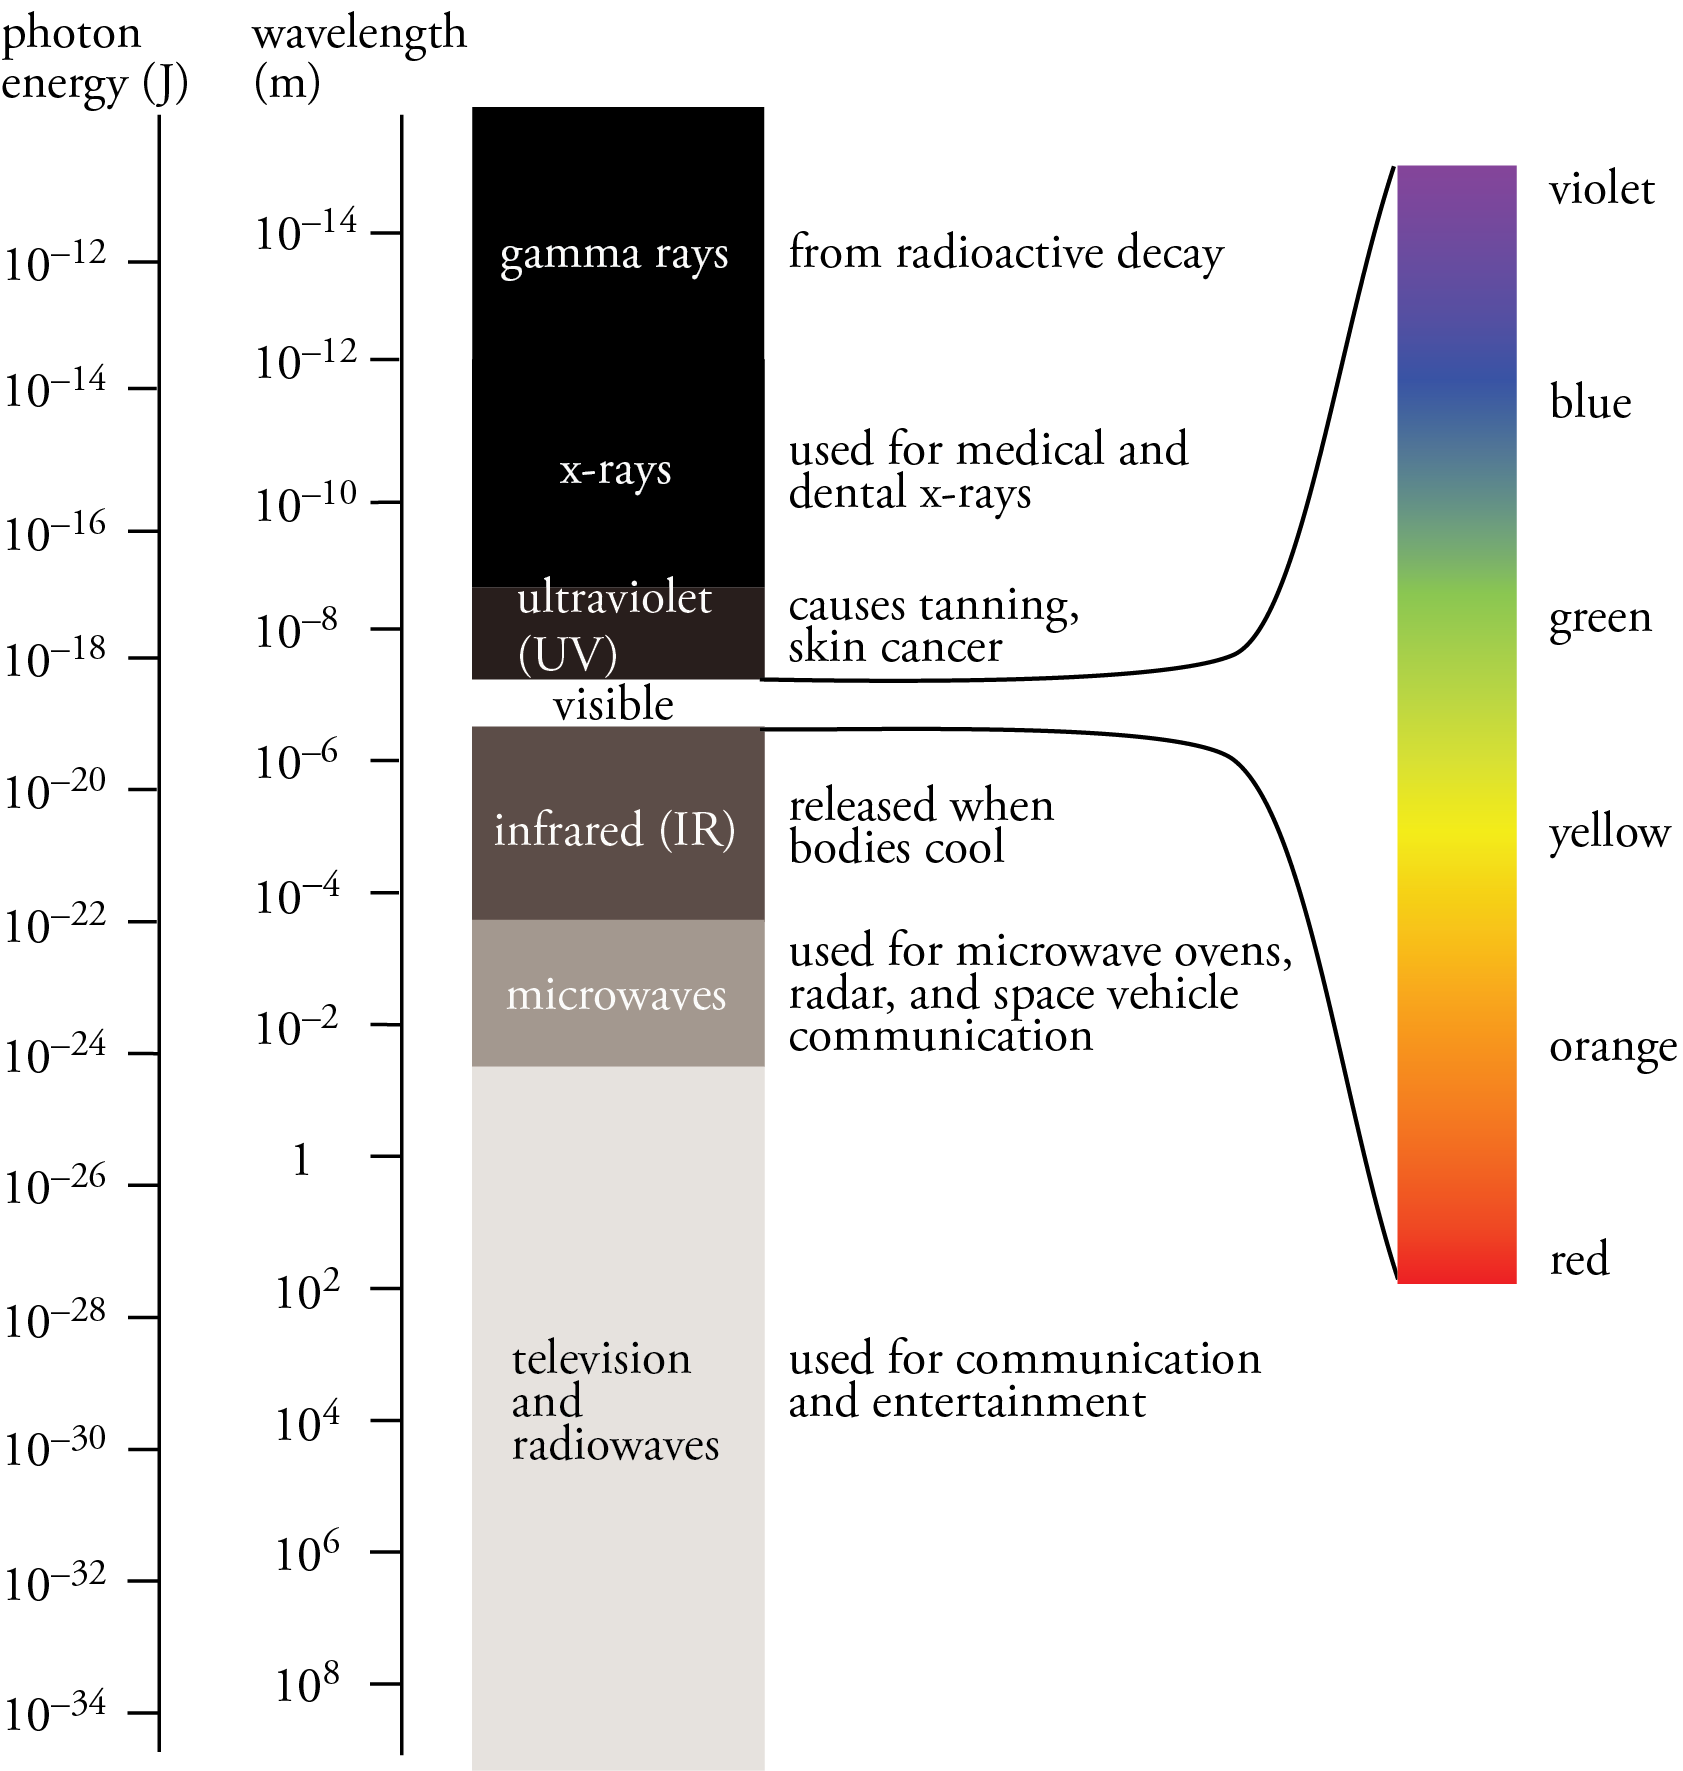 An image of the complete continuous electromagnetic spectrum, showing the different forms of radiant energy